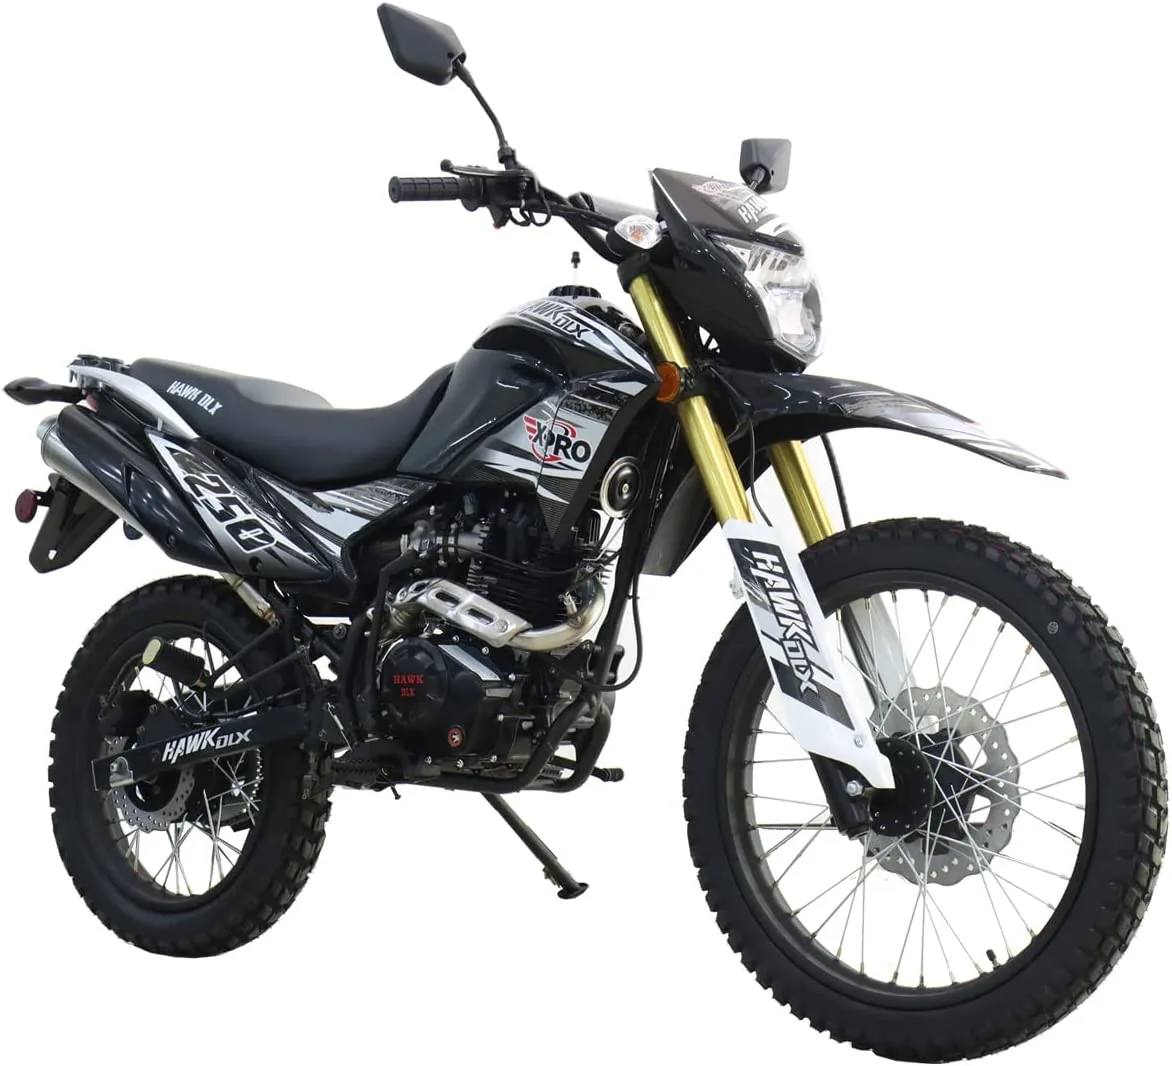 X Pro Hawk DLX 250 Street Legal Dirt Bike Best Dual Sport Motorcycle Based On YOUR Needs [2023]